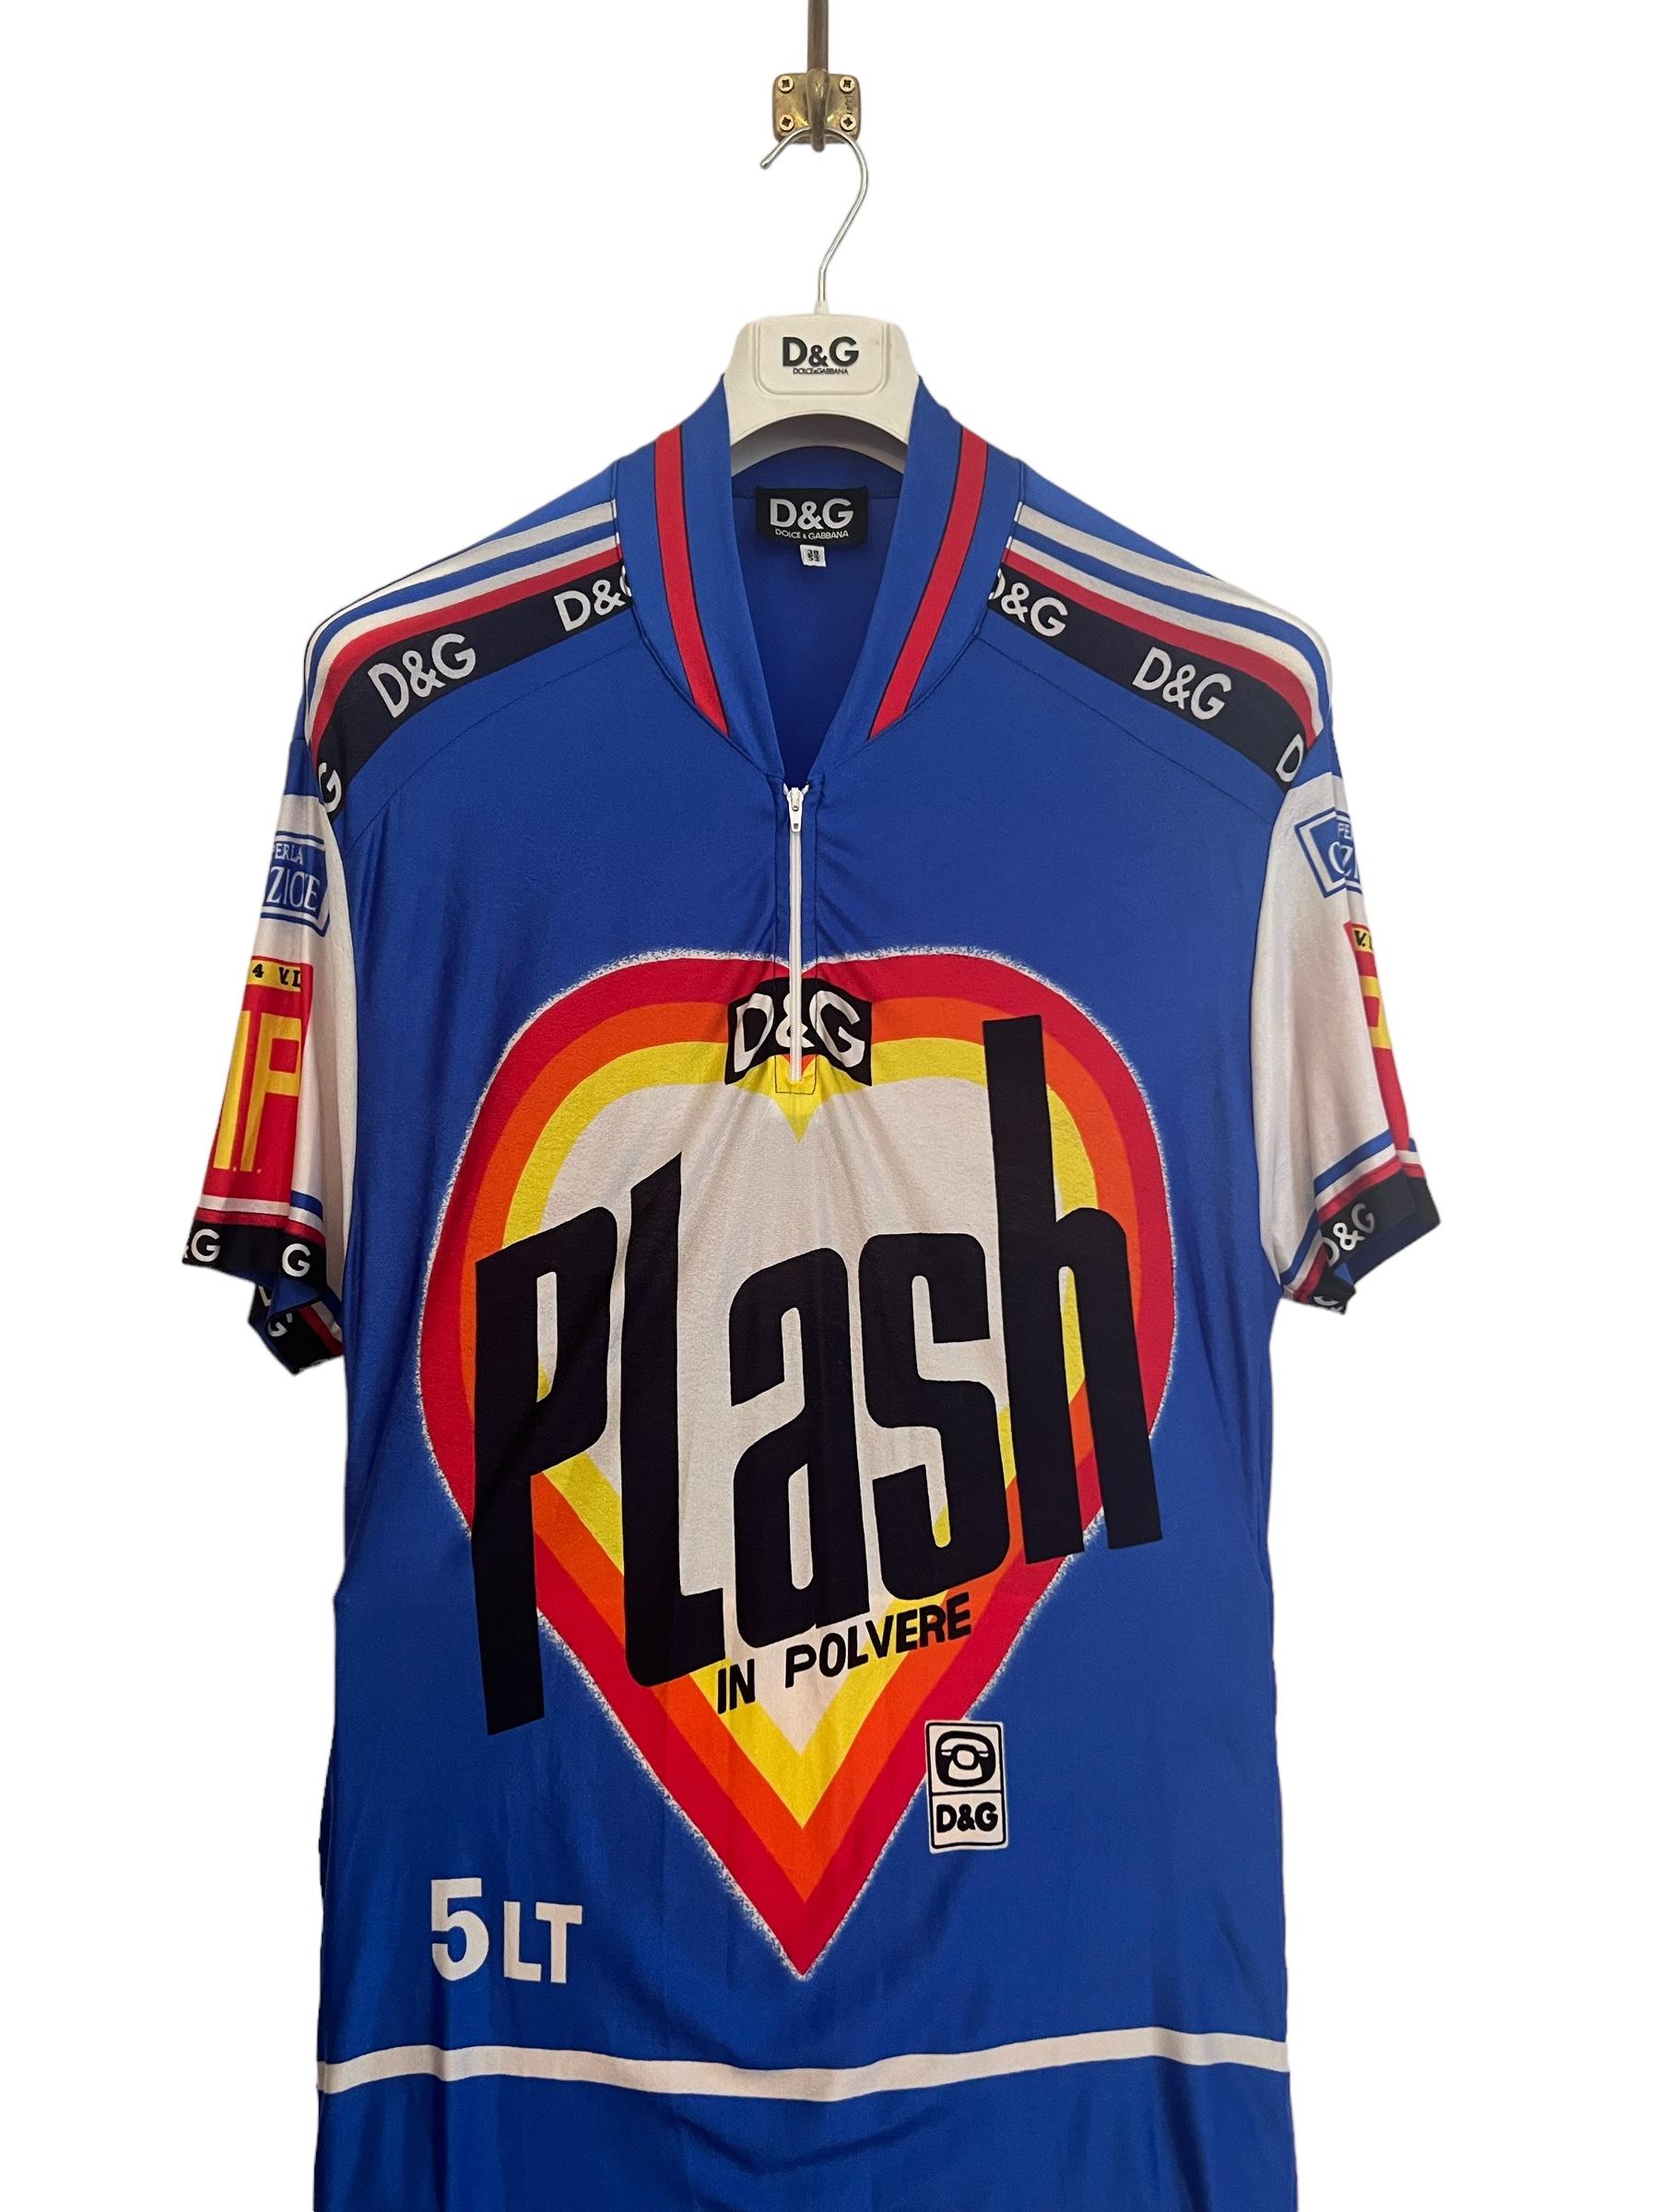 1990's Vintage Colourful Vibrant Dolce & Gabbana Cycling Jersey Top In Fair Condition For Sale In Sheffield, GB